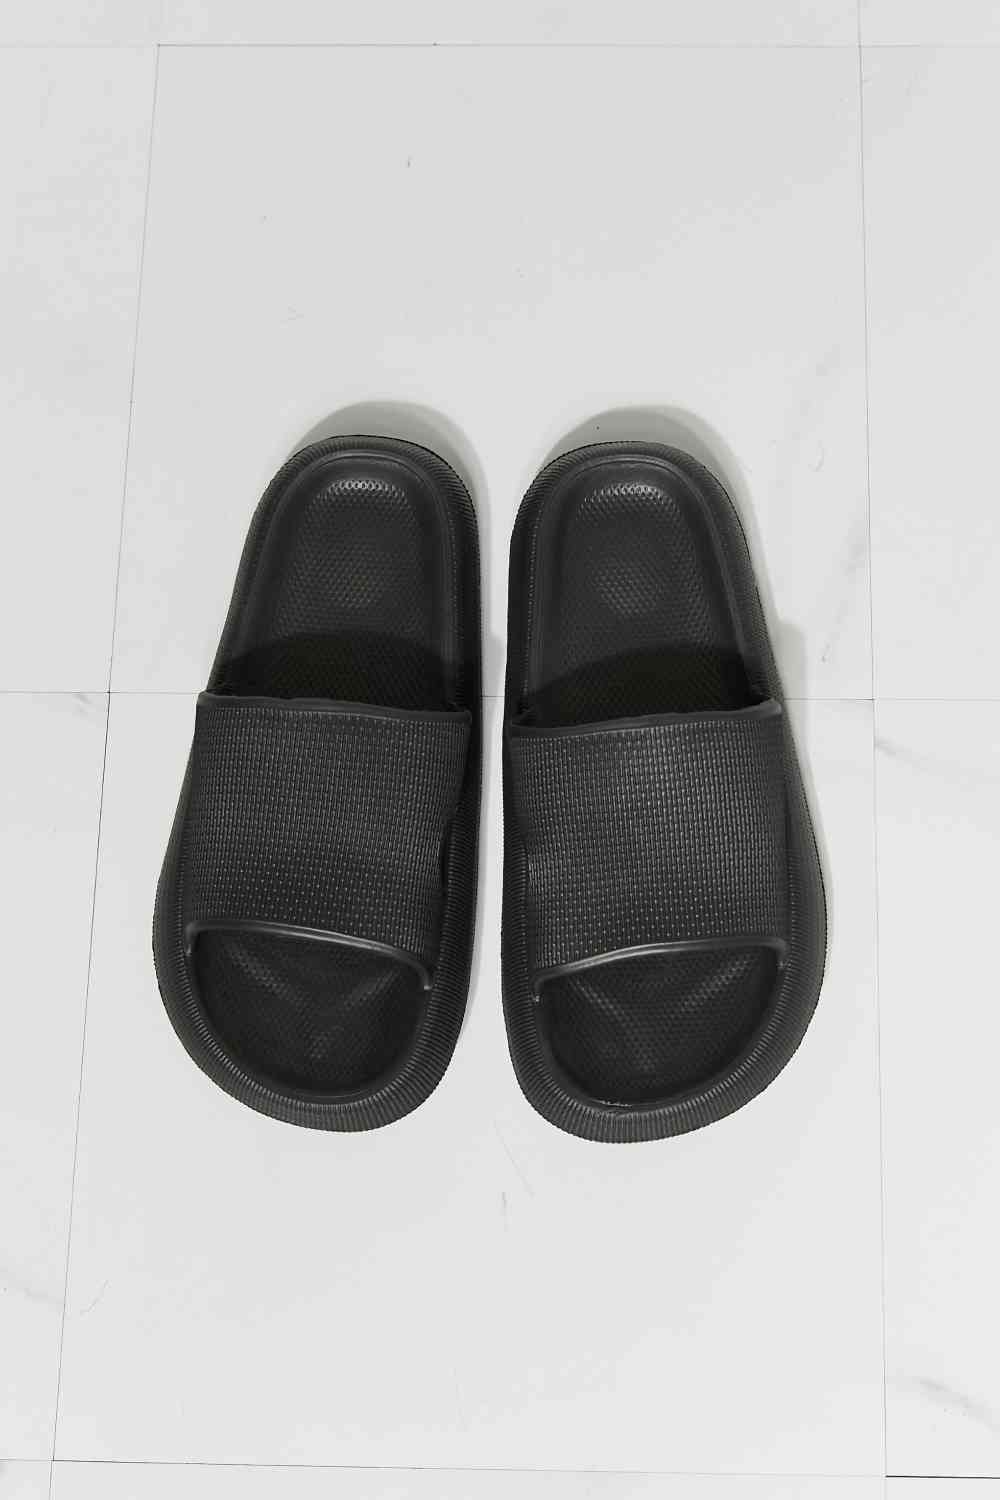 Arms Around Me Open Toe Slide in Black - Accessories - Shoes - 4 - 2024